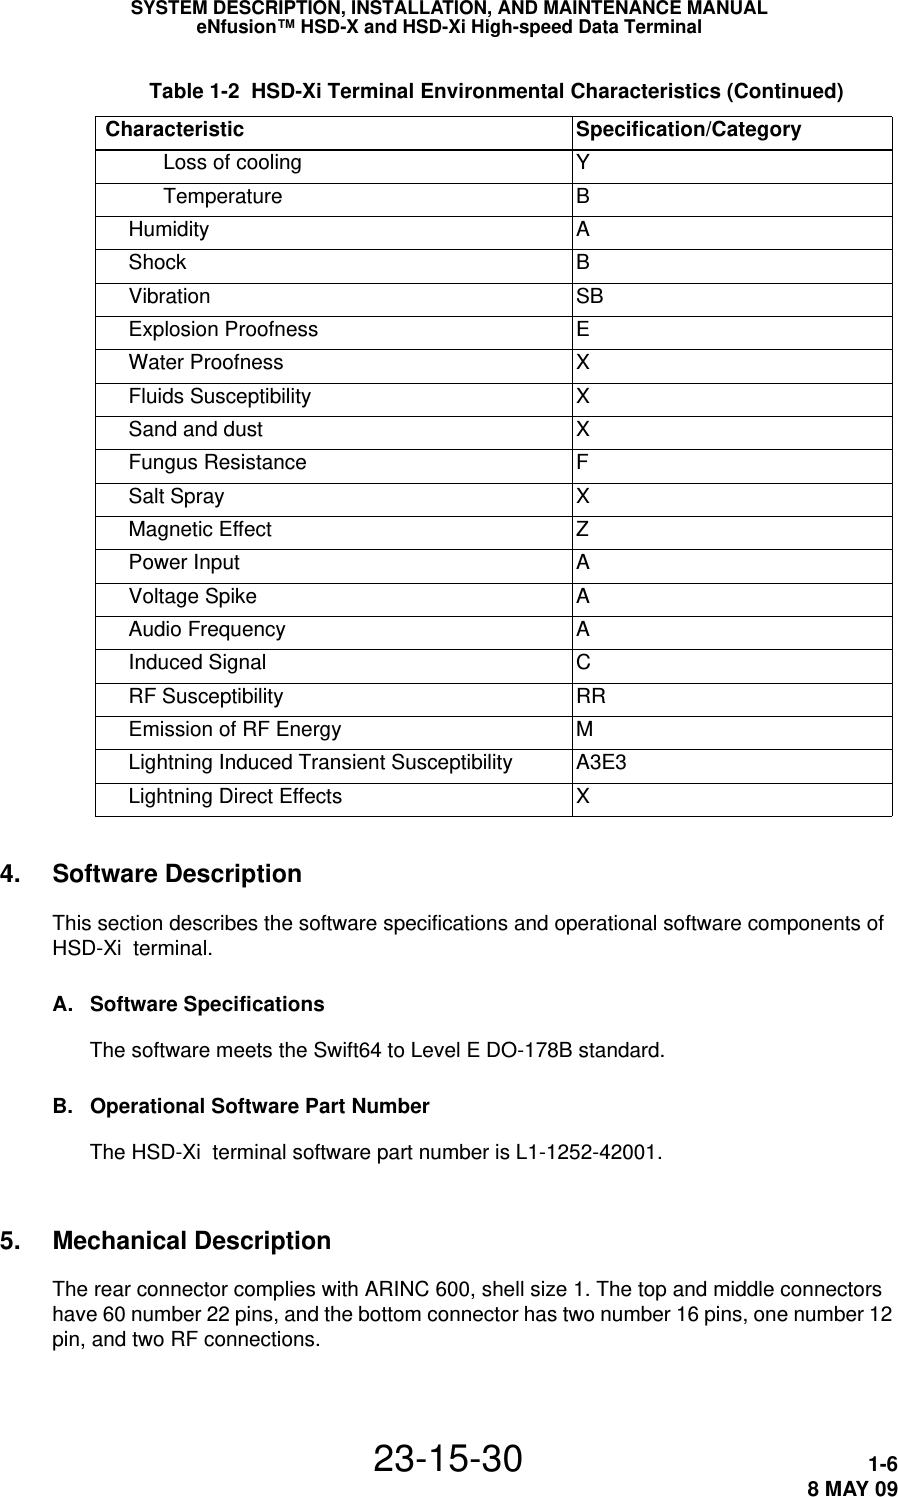 SYSTEM DESCRIPTION, INSTALLATION, AND MAINTENANCE MANUALeNfusion™ HSD-X and HSD-Xi High-speed Data Terminal23-15-30 1-68 MAY 094. Software DescriptionThis section describes the software specifications and operational software components of HSD-Xi  terminal.A. Software SpecificationsThe software meets the Swift64 to Level E DO-178B standard. B. Operational Software Part NumberThe HSD-Xi  terminal software part number is L1-1252-42001.5. Mechanical DescriptionThe rear connector complies with ARINC 600, shell size 1. The top and middle connectors have 60 number 22 pins, and the bottom connector has two number 16 pins, one number 12 pin, and two RF connections.           Loss of cooling Y           Temperature B     Humidity A     Shock B     Vibration SB     Explosion Proofness E     Water Proofness X     Fluids Susceptibility X     Sand and dust X     Fungus Resistance F     Salt Spray X     Magnetic Effect Z     Power Input A     Voltage Spike A     Audio Frequency A     Induced Signal C     RF Susceptibility RR     Emission of RF Energy  M      Lightning Induced Transient Susceptibility A3E3     Lightning Direct Effects X Table 1-2  HSD-Xi Terminal Environmental Characteristics (Continued) Characteristic Specification/Category